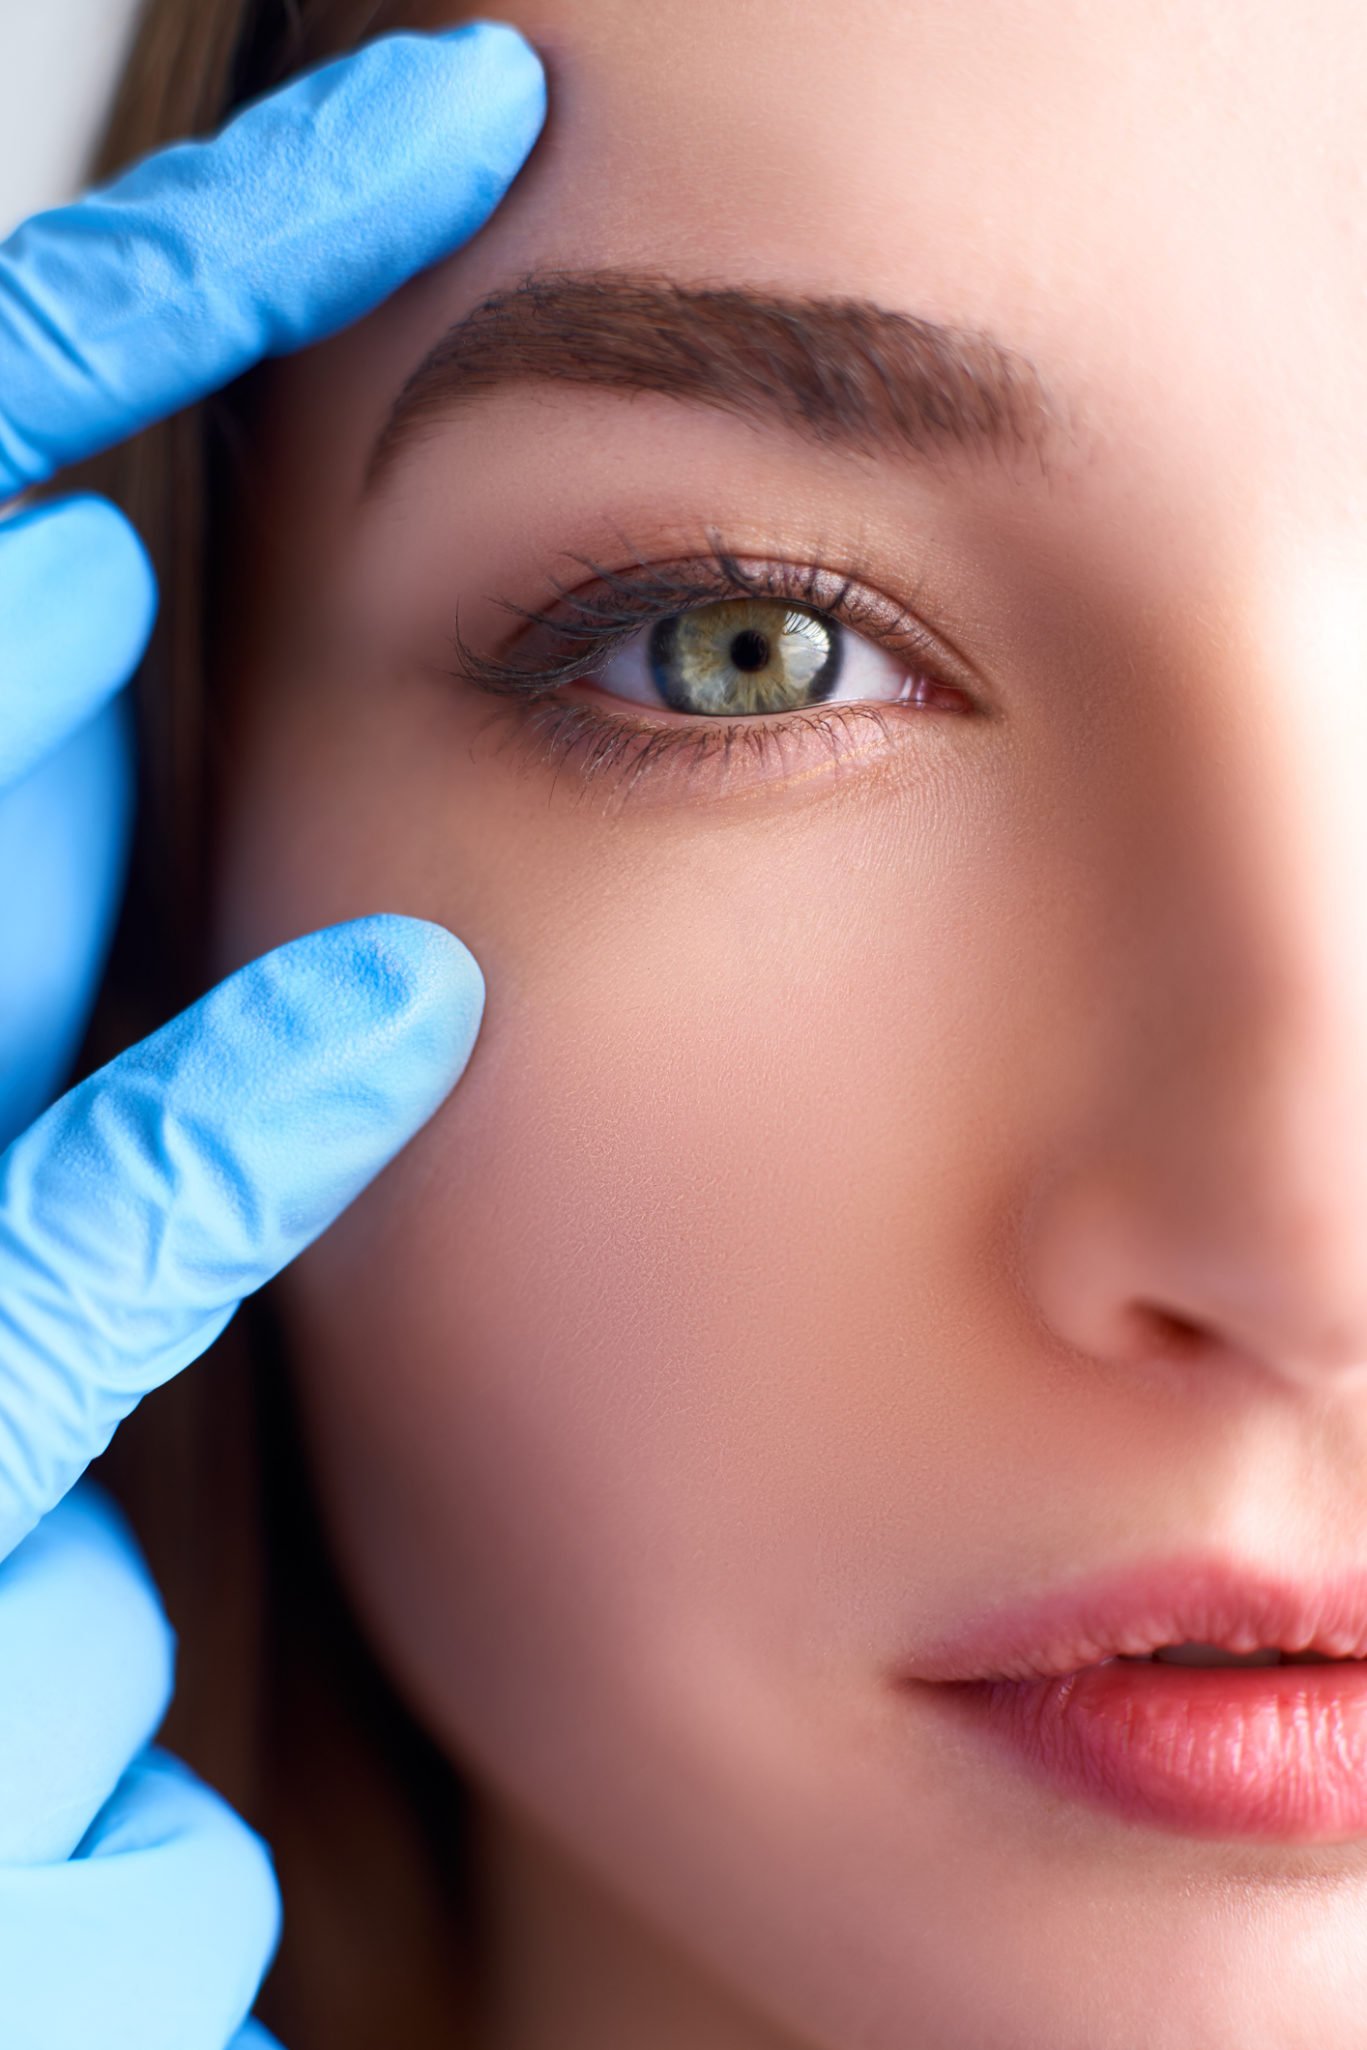 Beautician doctor hands in gloves touching female face. Upper eyelid reduction, double eye lid removal plastic surgery concept. Ophthalmologist or oculist checks healthy vision in green eyesight.